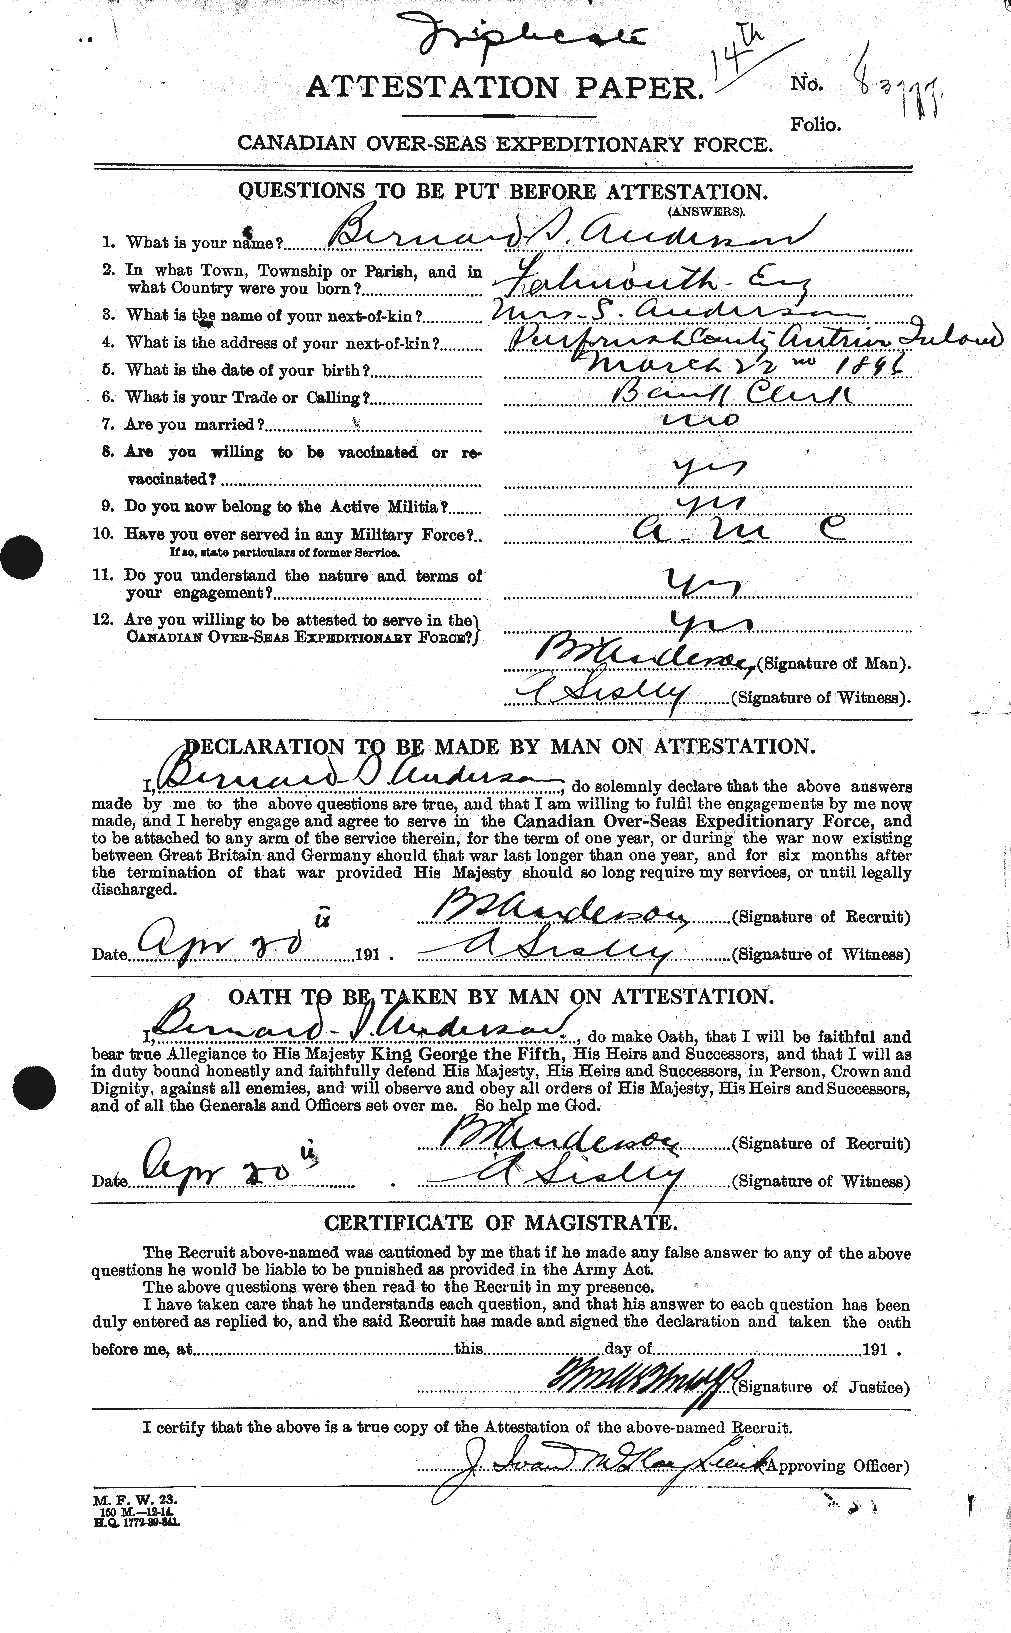 Personnel Records of the First World War - CEF 209315a